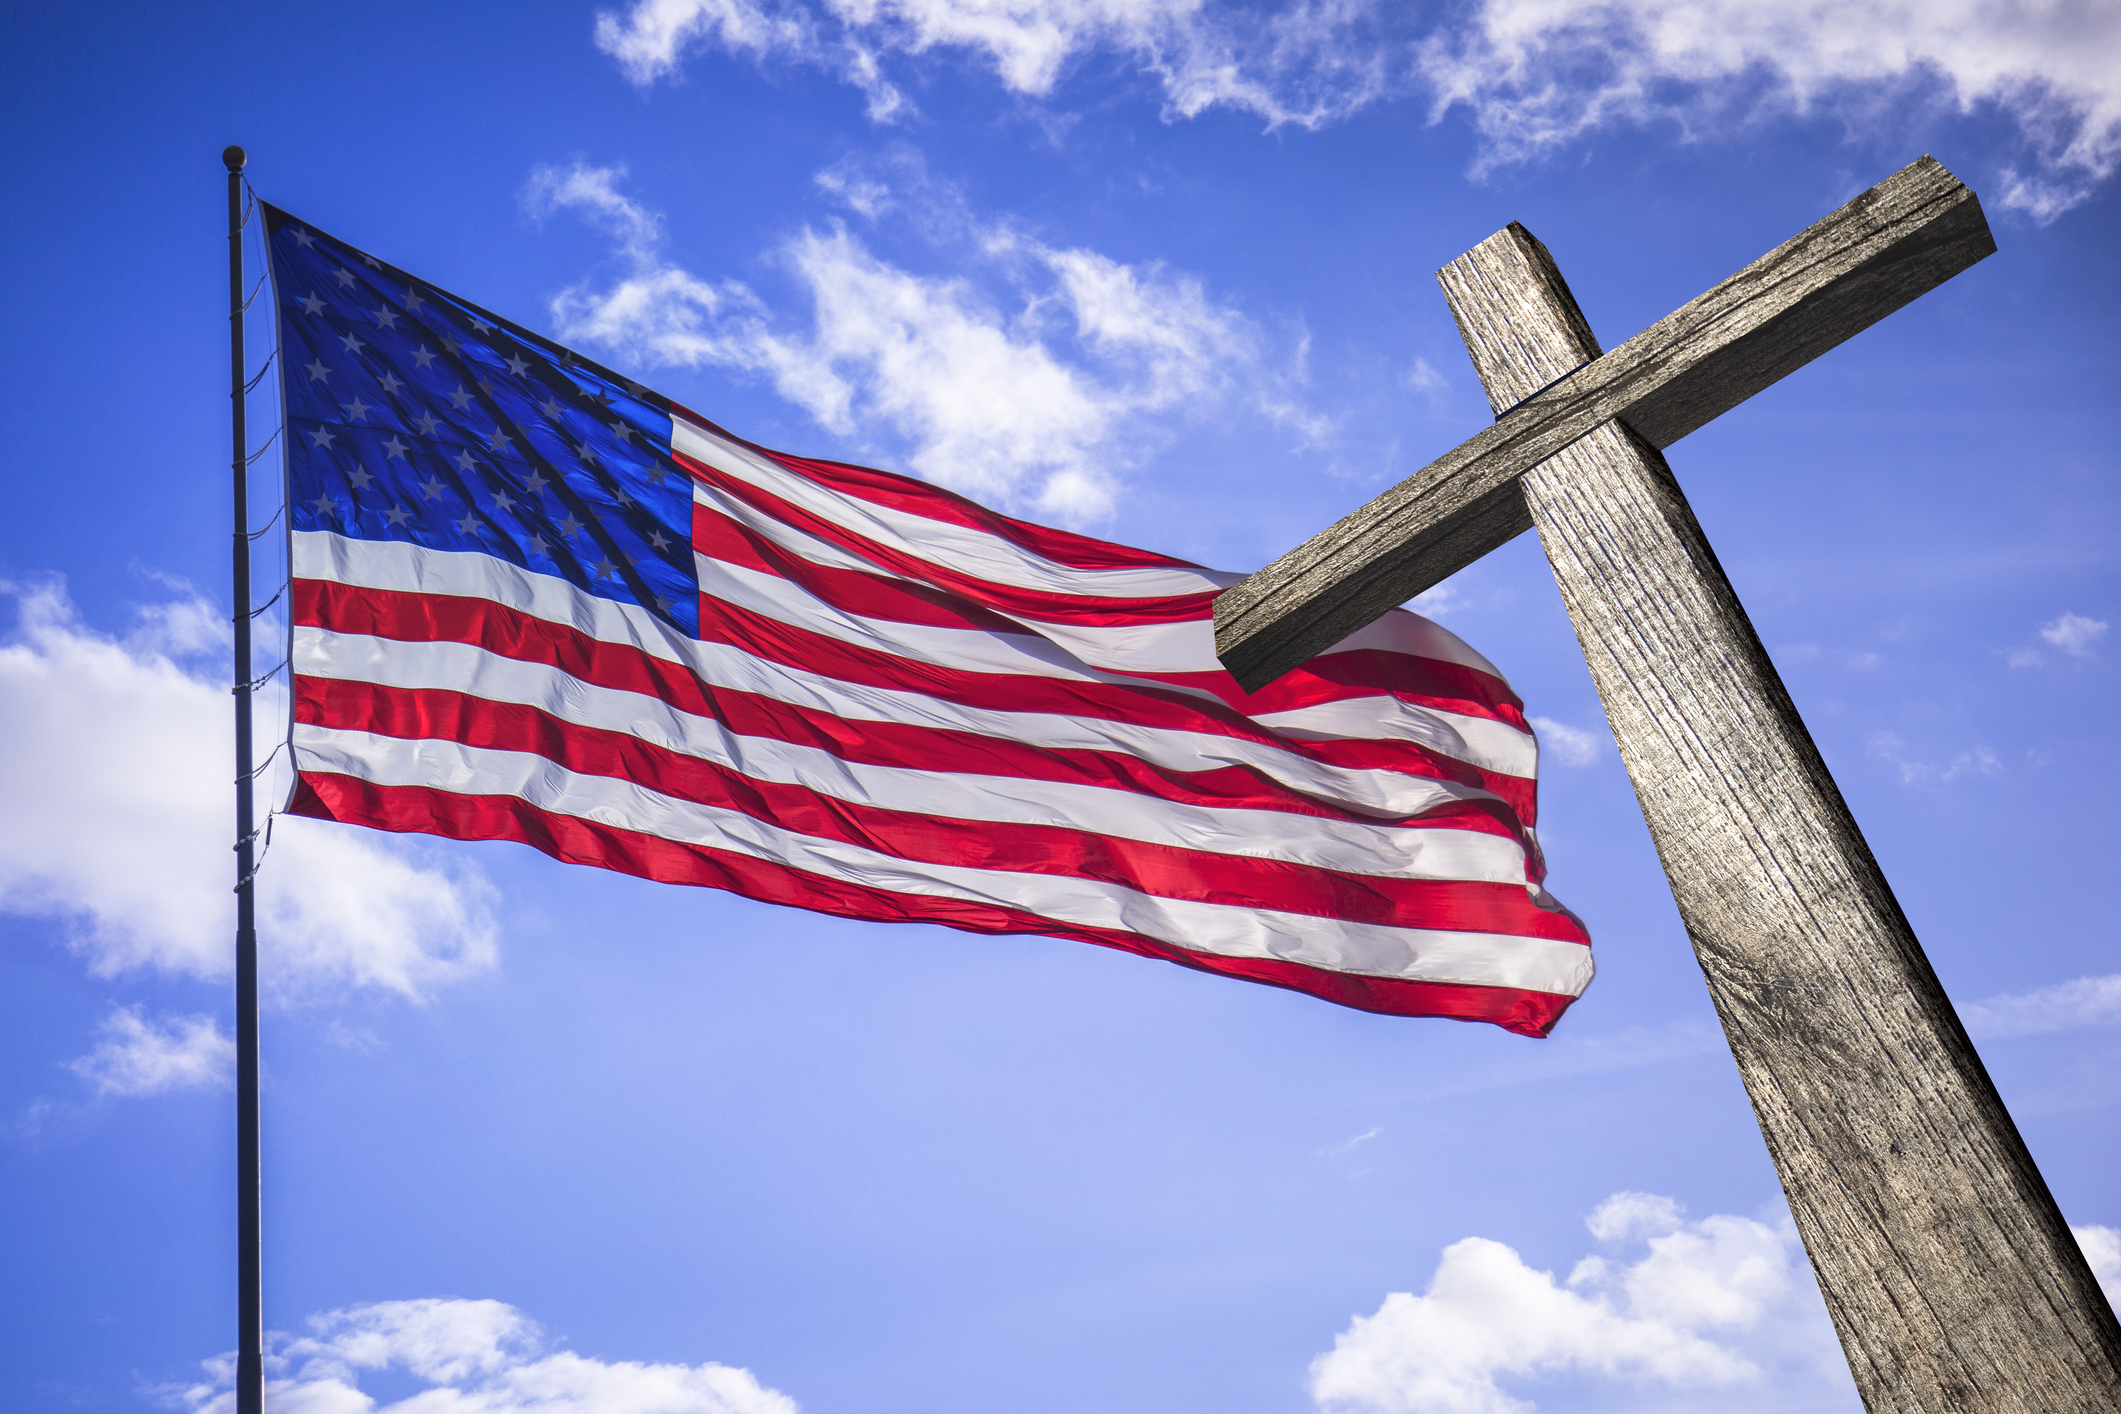 American flag with a wooden cross